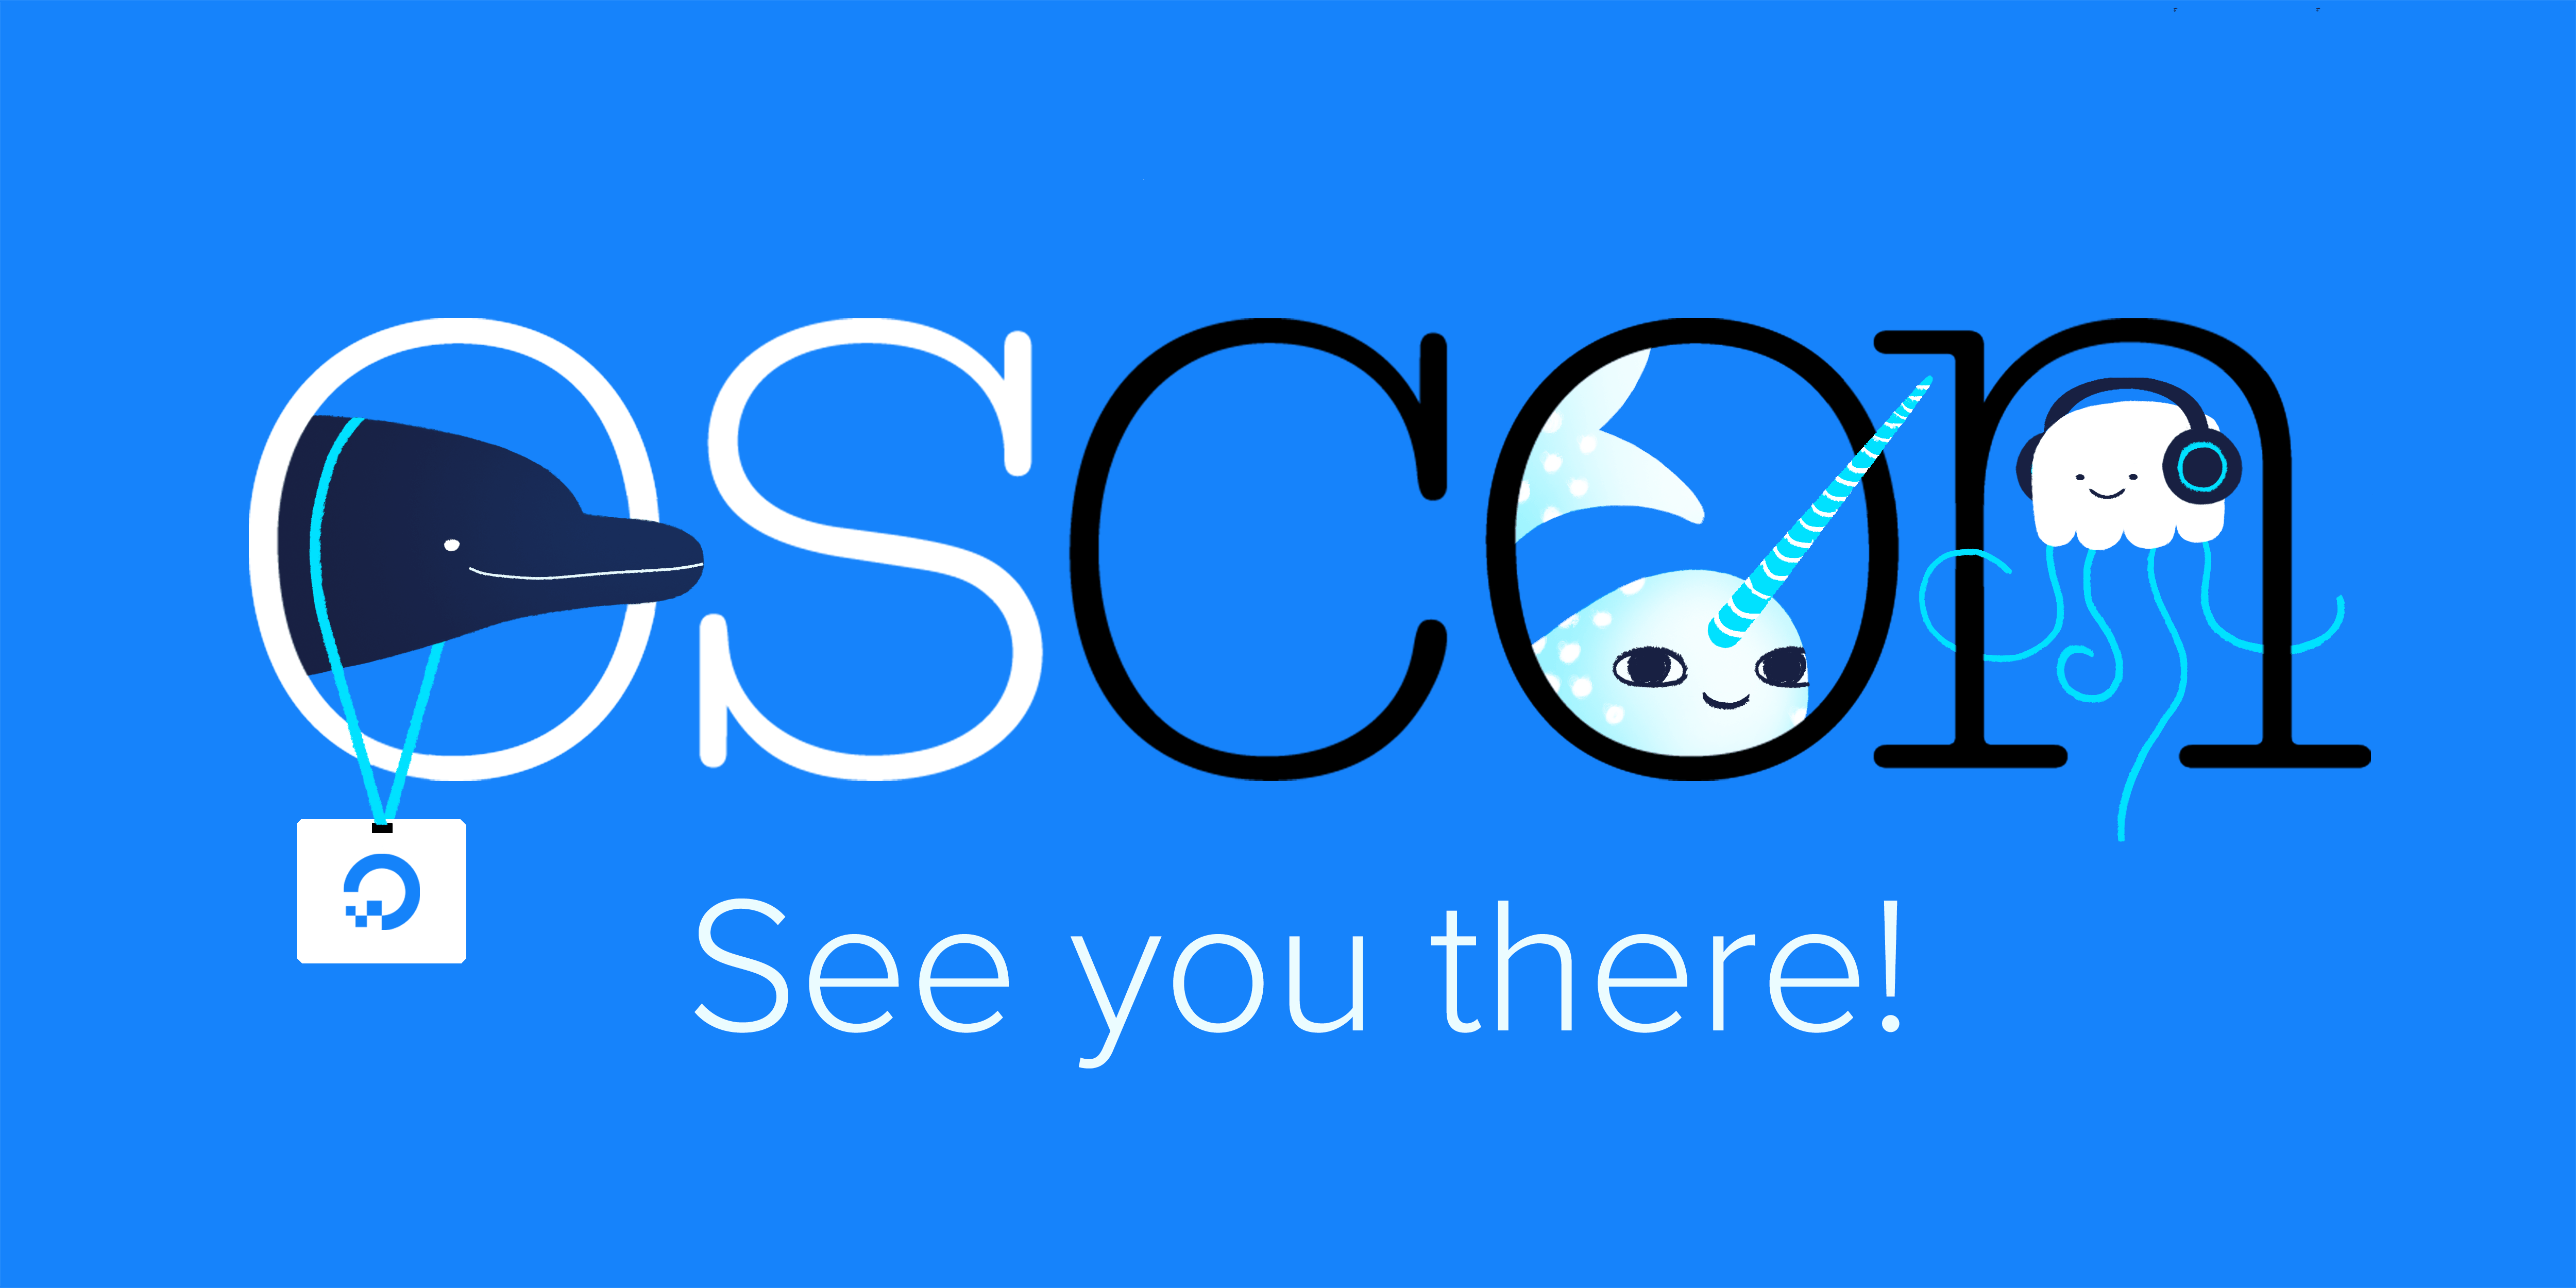 OSCon letters with a dolphin, narwhal, and jellyfish popping out of the letters with the words 'See you there!' underneath illustration